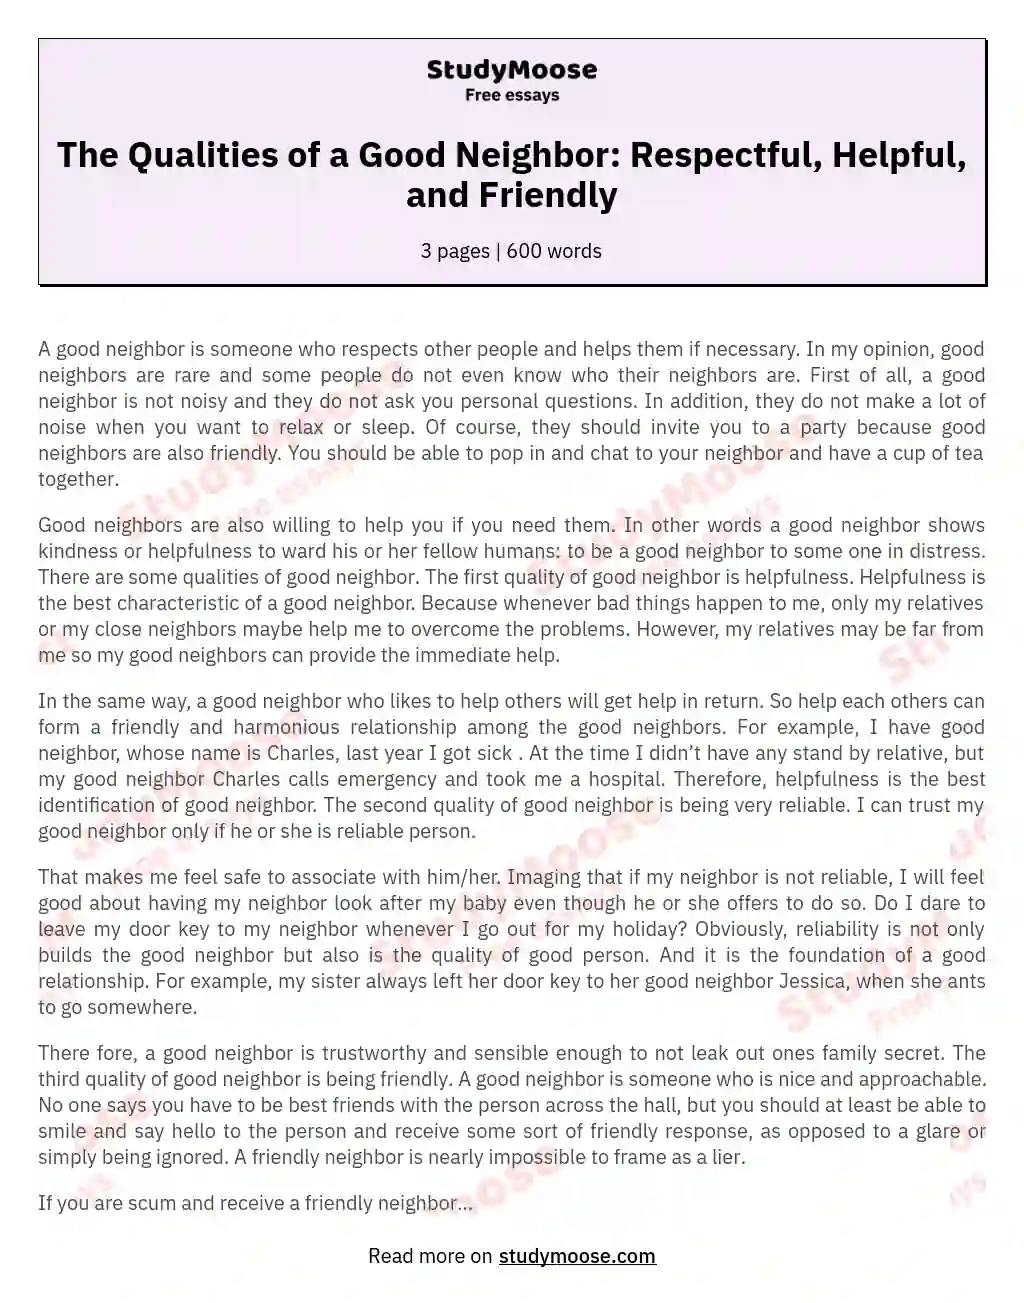 The Qualities of a Good Neighbor: Respectful, Helpful, and Friendly essay